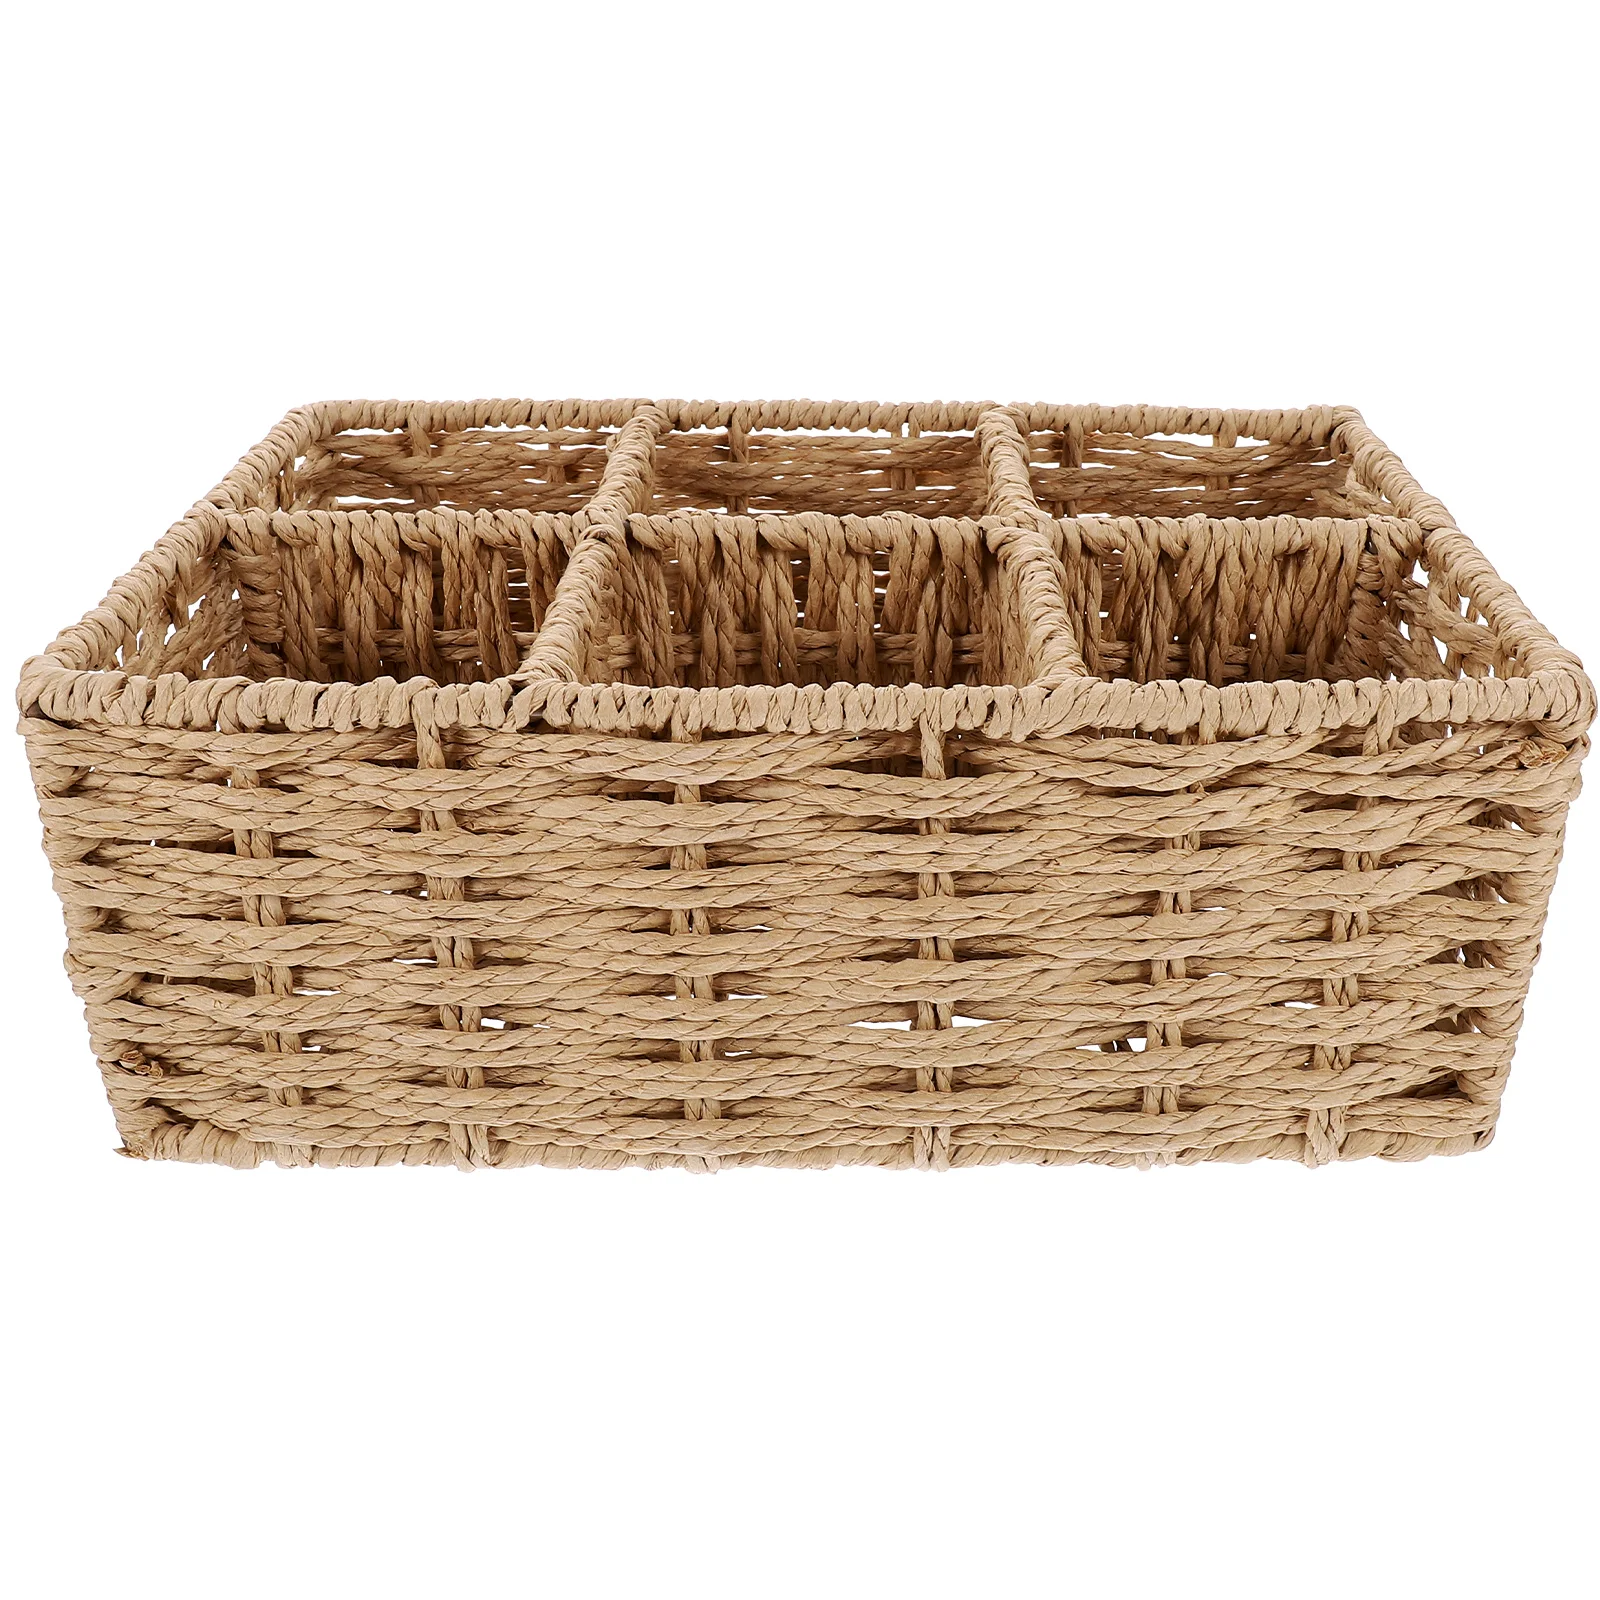 

Hexagon Grid Storage Box Rattan Baskets Small Items Holder Sundries Organizer Home Supply Paper Rope Jewelry Office